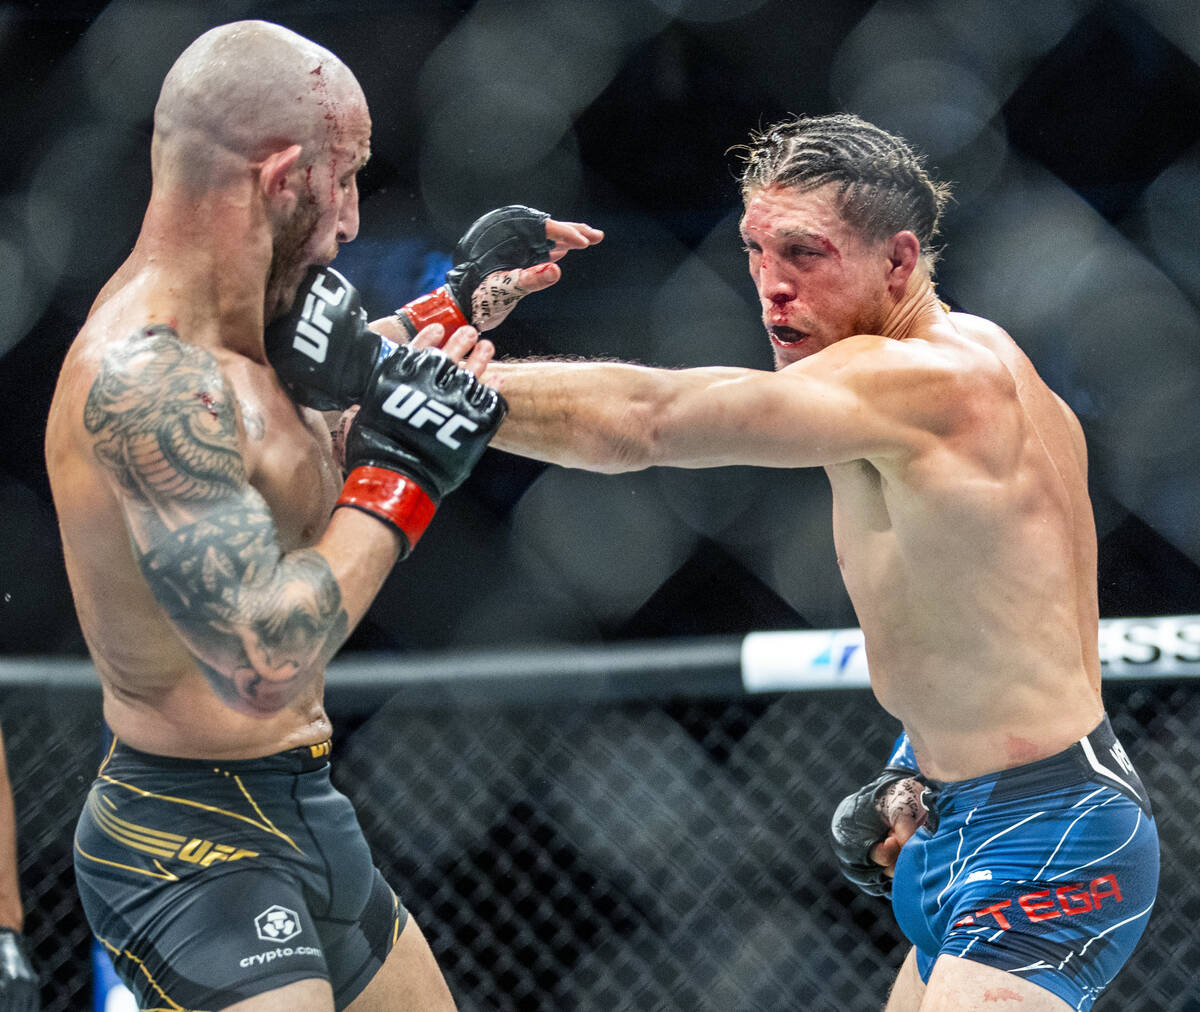 Alexander Volkanovski, left, takes a punch to the chin from Brian Ortega in the fourth round du ...